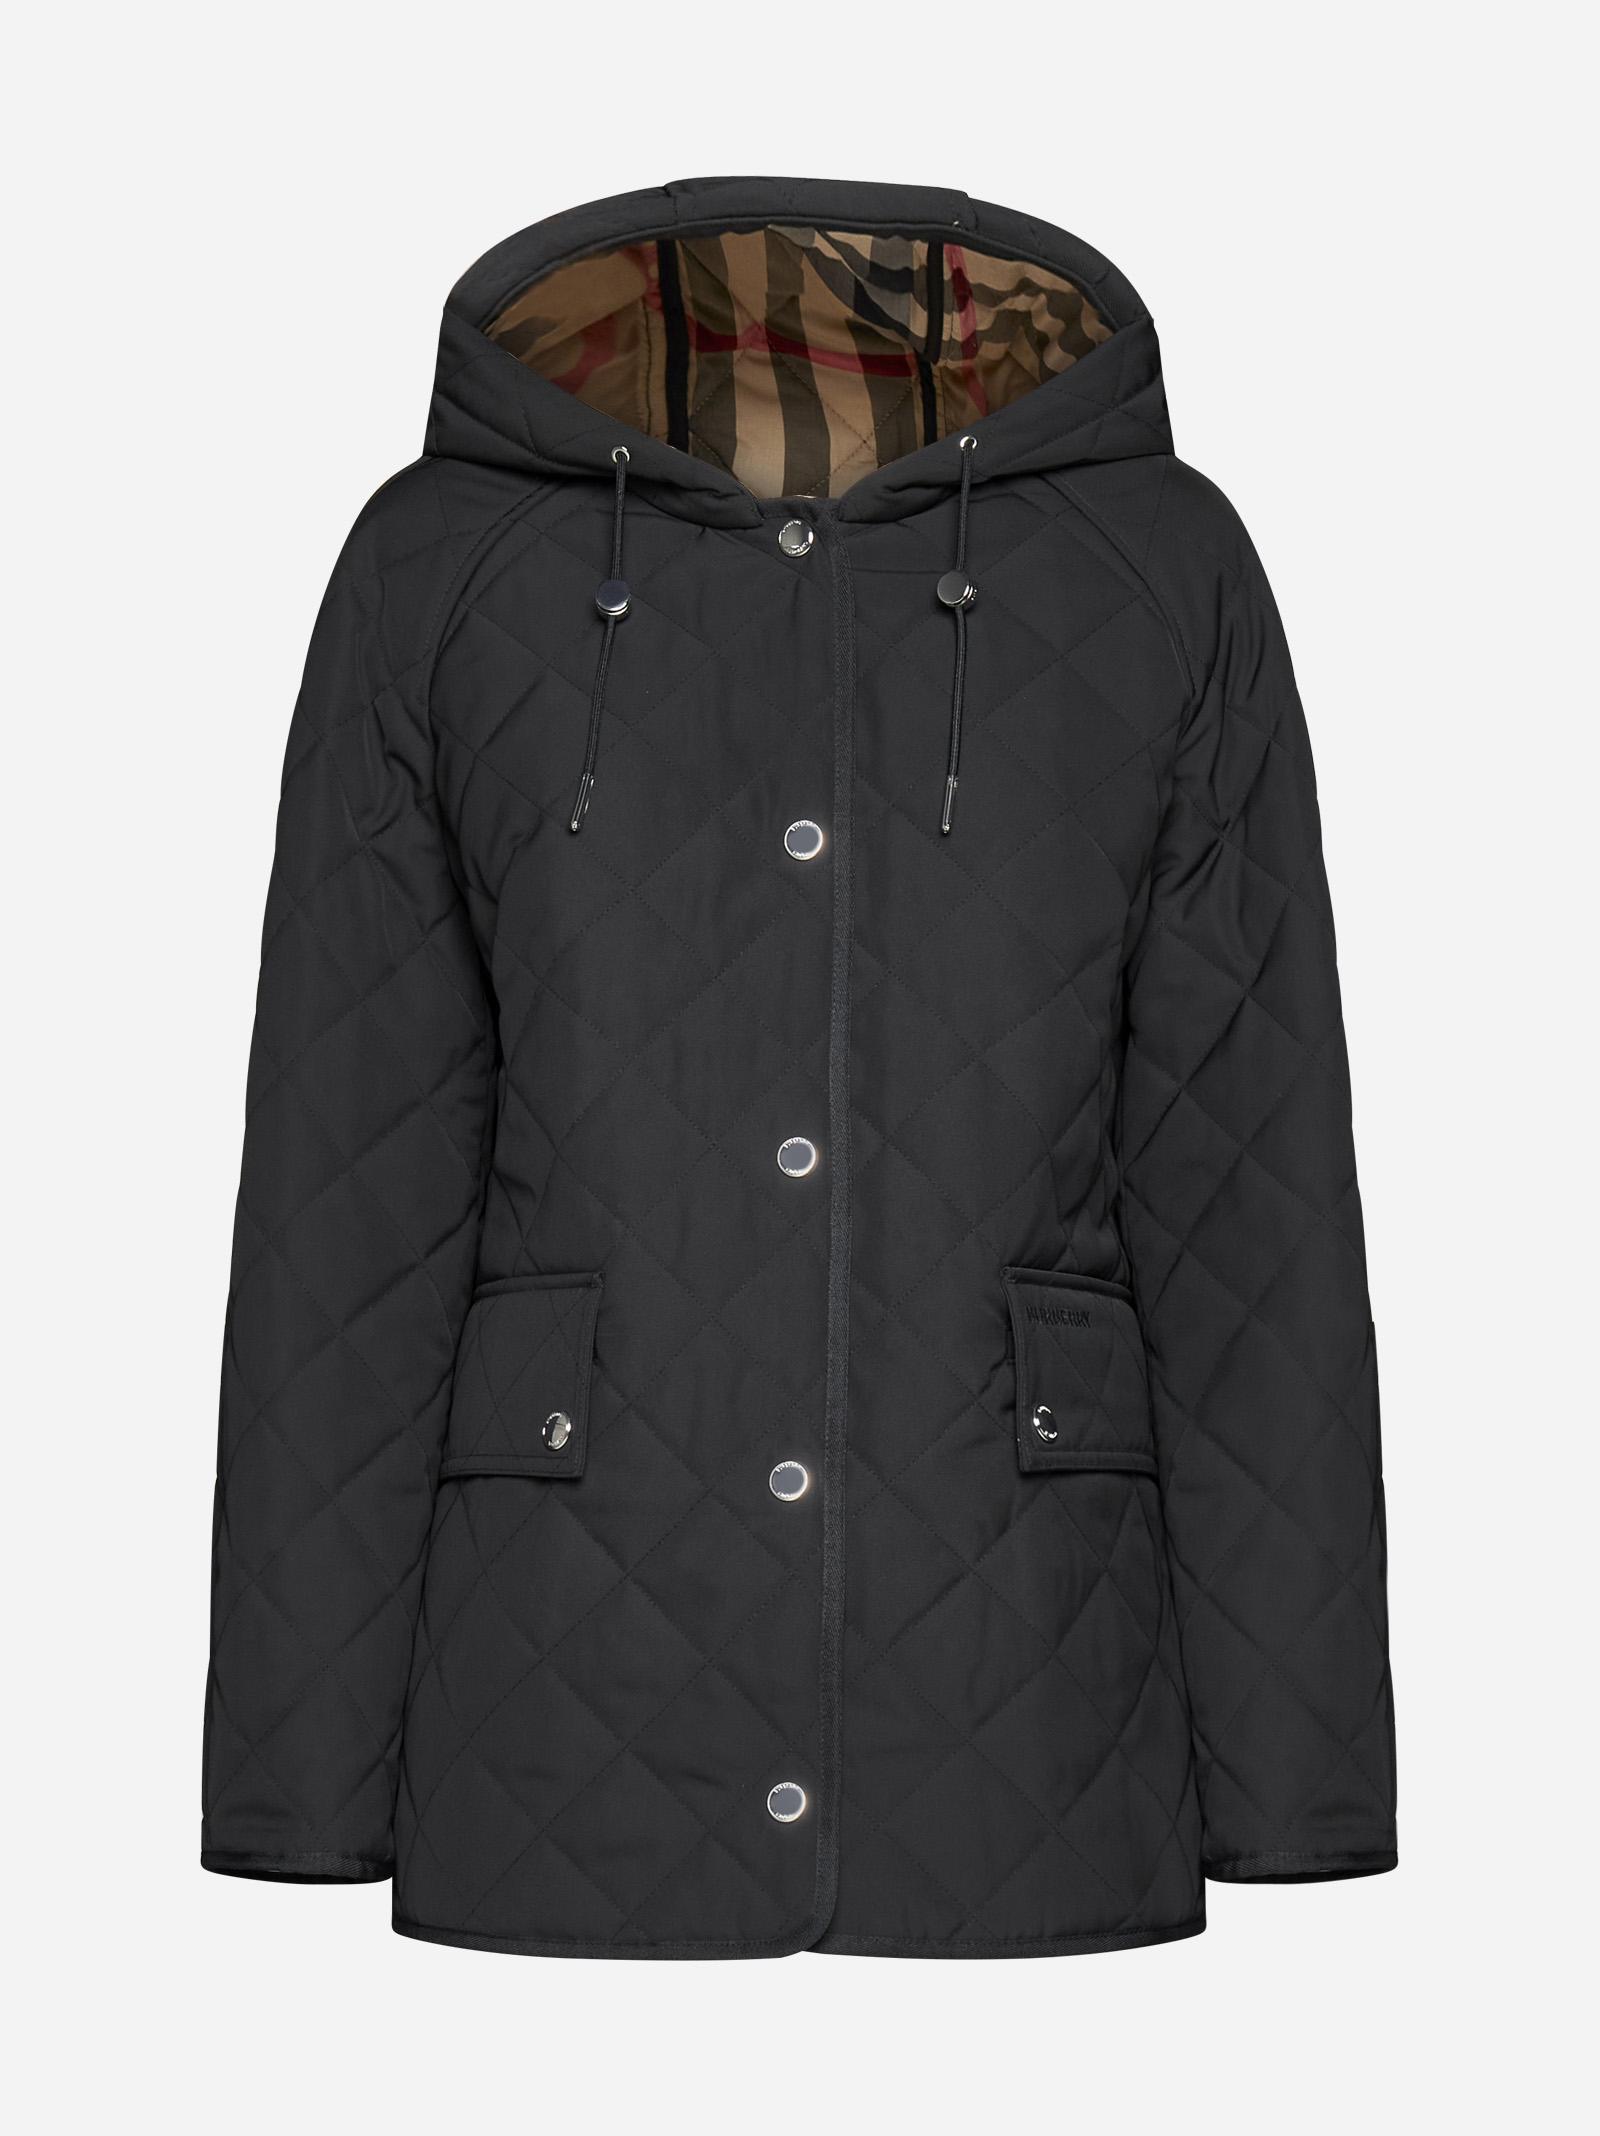 Burberry Meddon Quilted Nylon Jacket in Black | Lyst